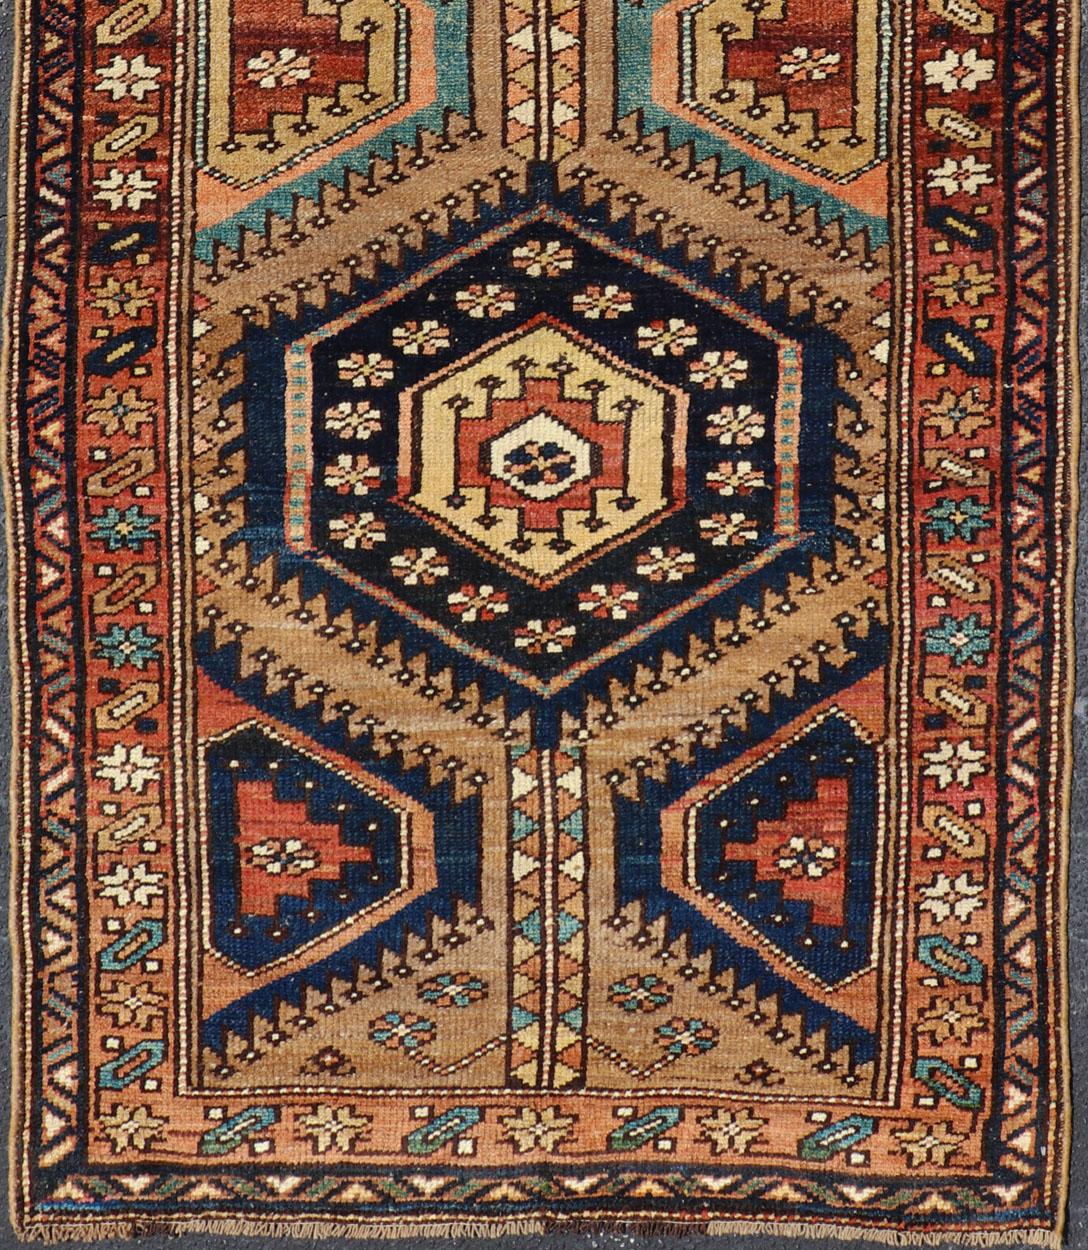 Medallion design on camel field, with dark blue medallions, green, red, blue , rug EMB-8546-178695, country of origin / type: Iran / Hamedan, circa 1910

This antique Kurdish (circa early 20th century) short runner features a unique blend of